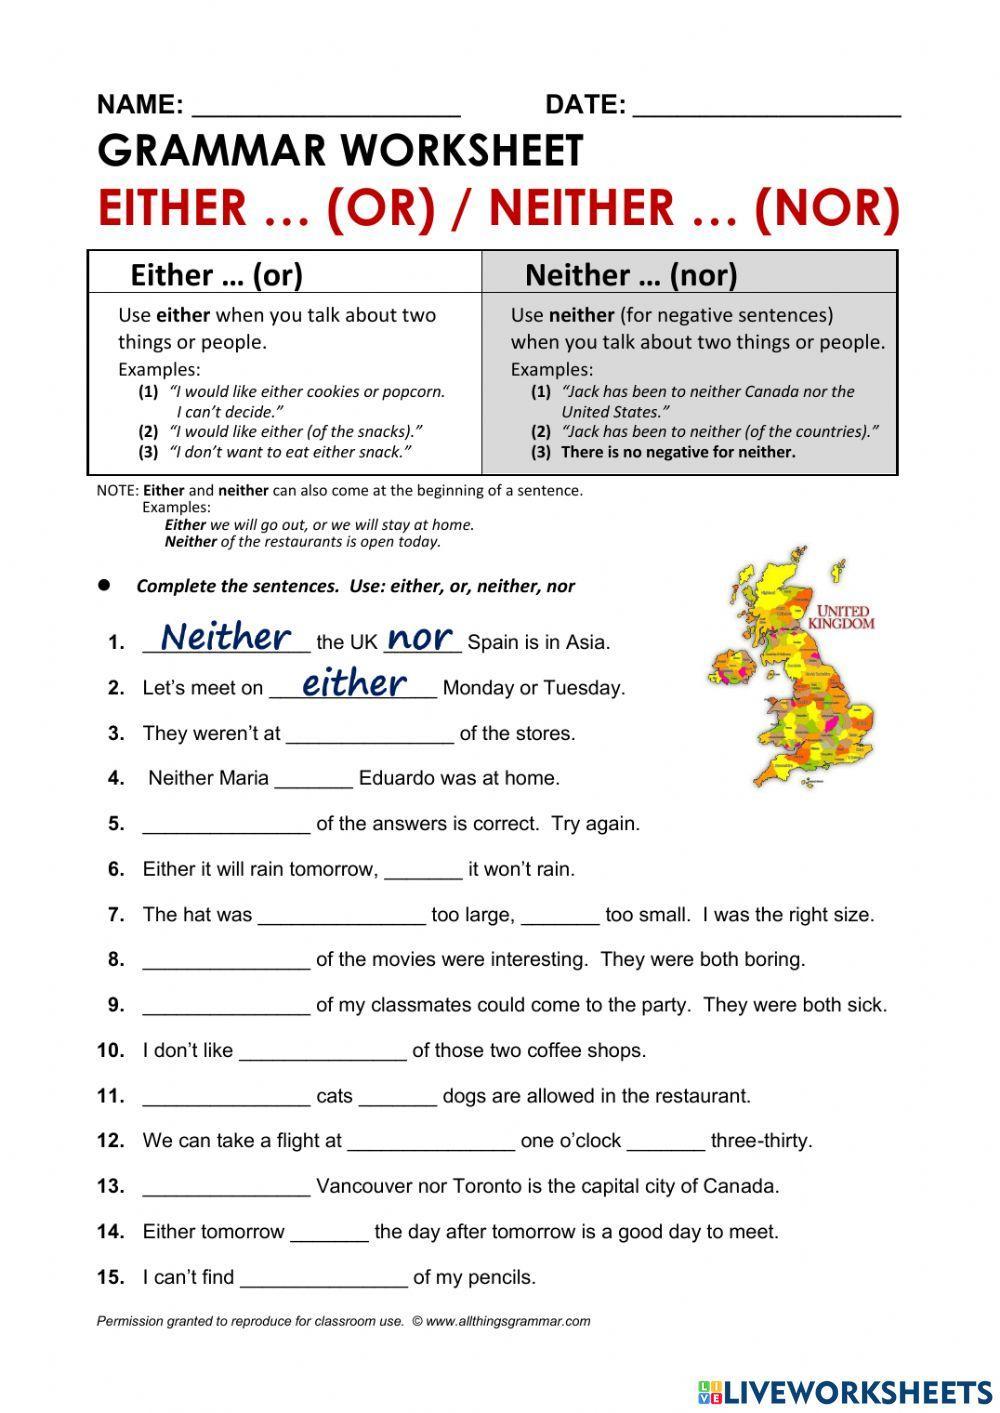 EITHER..(or)-NEITHER...(nor) online exercise for | Live Worksheets